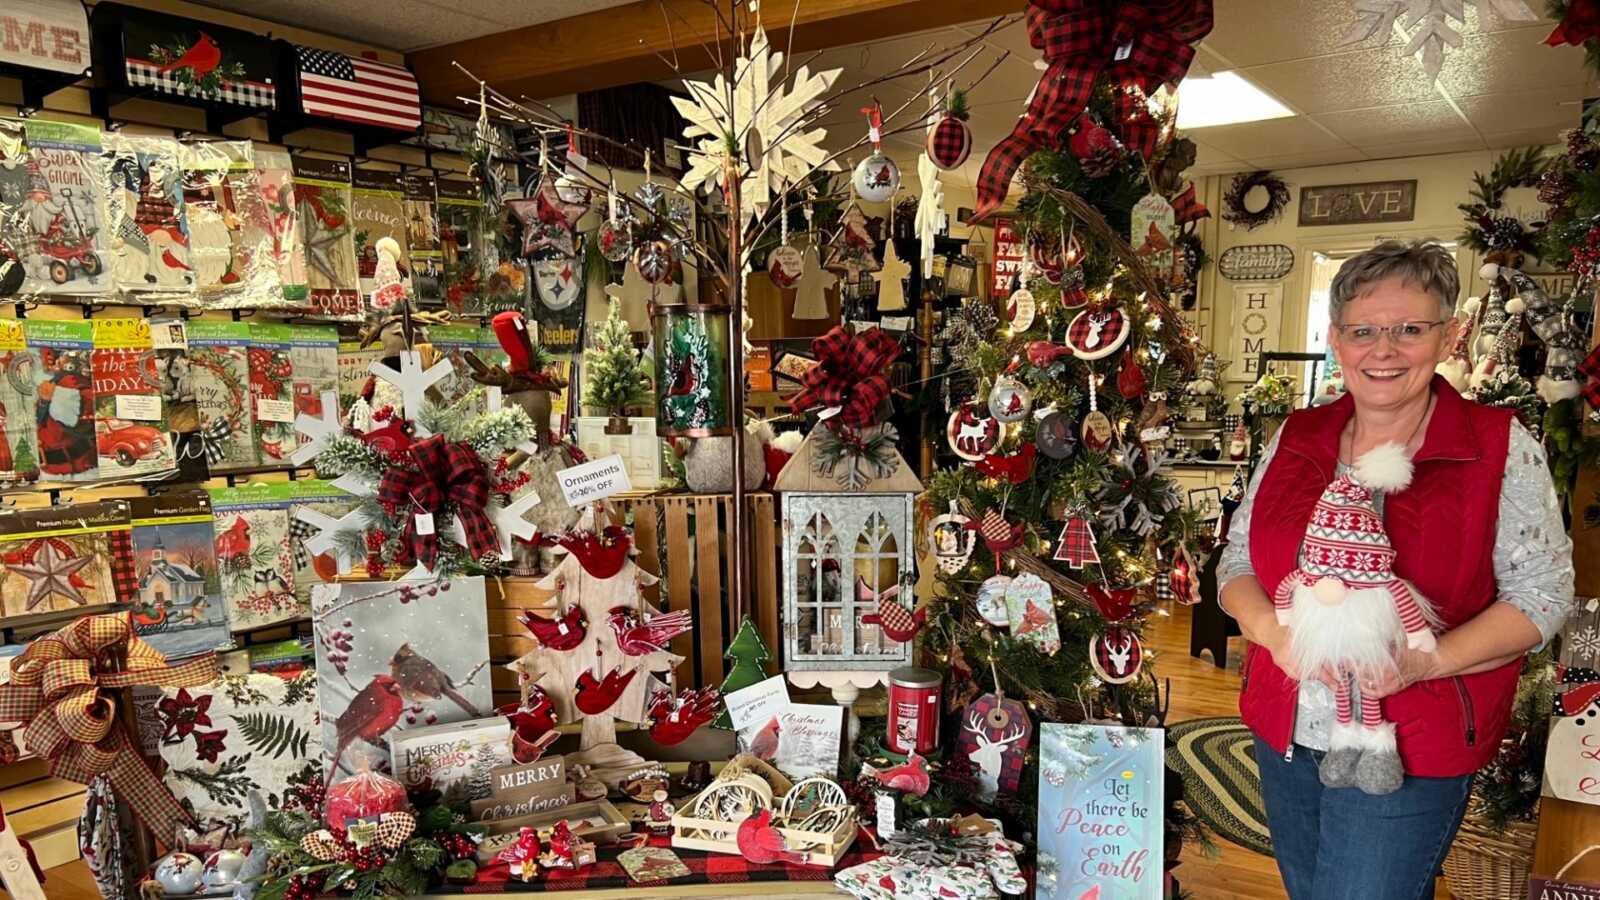 Small business owner in her Christmas decorations shop hiding a mini Santa